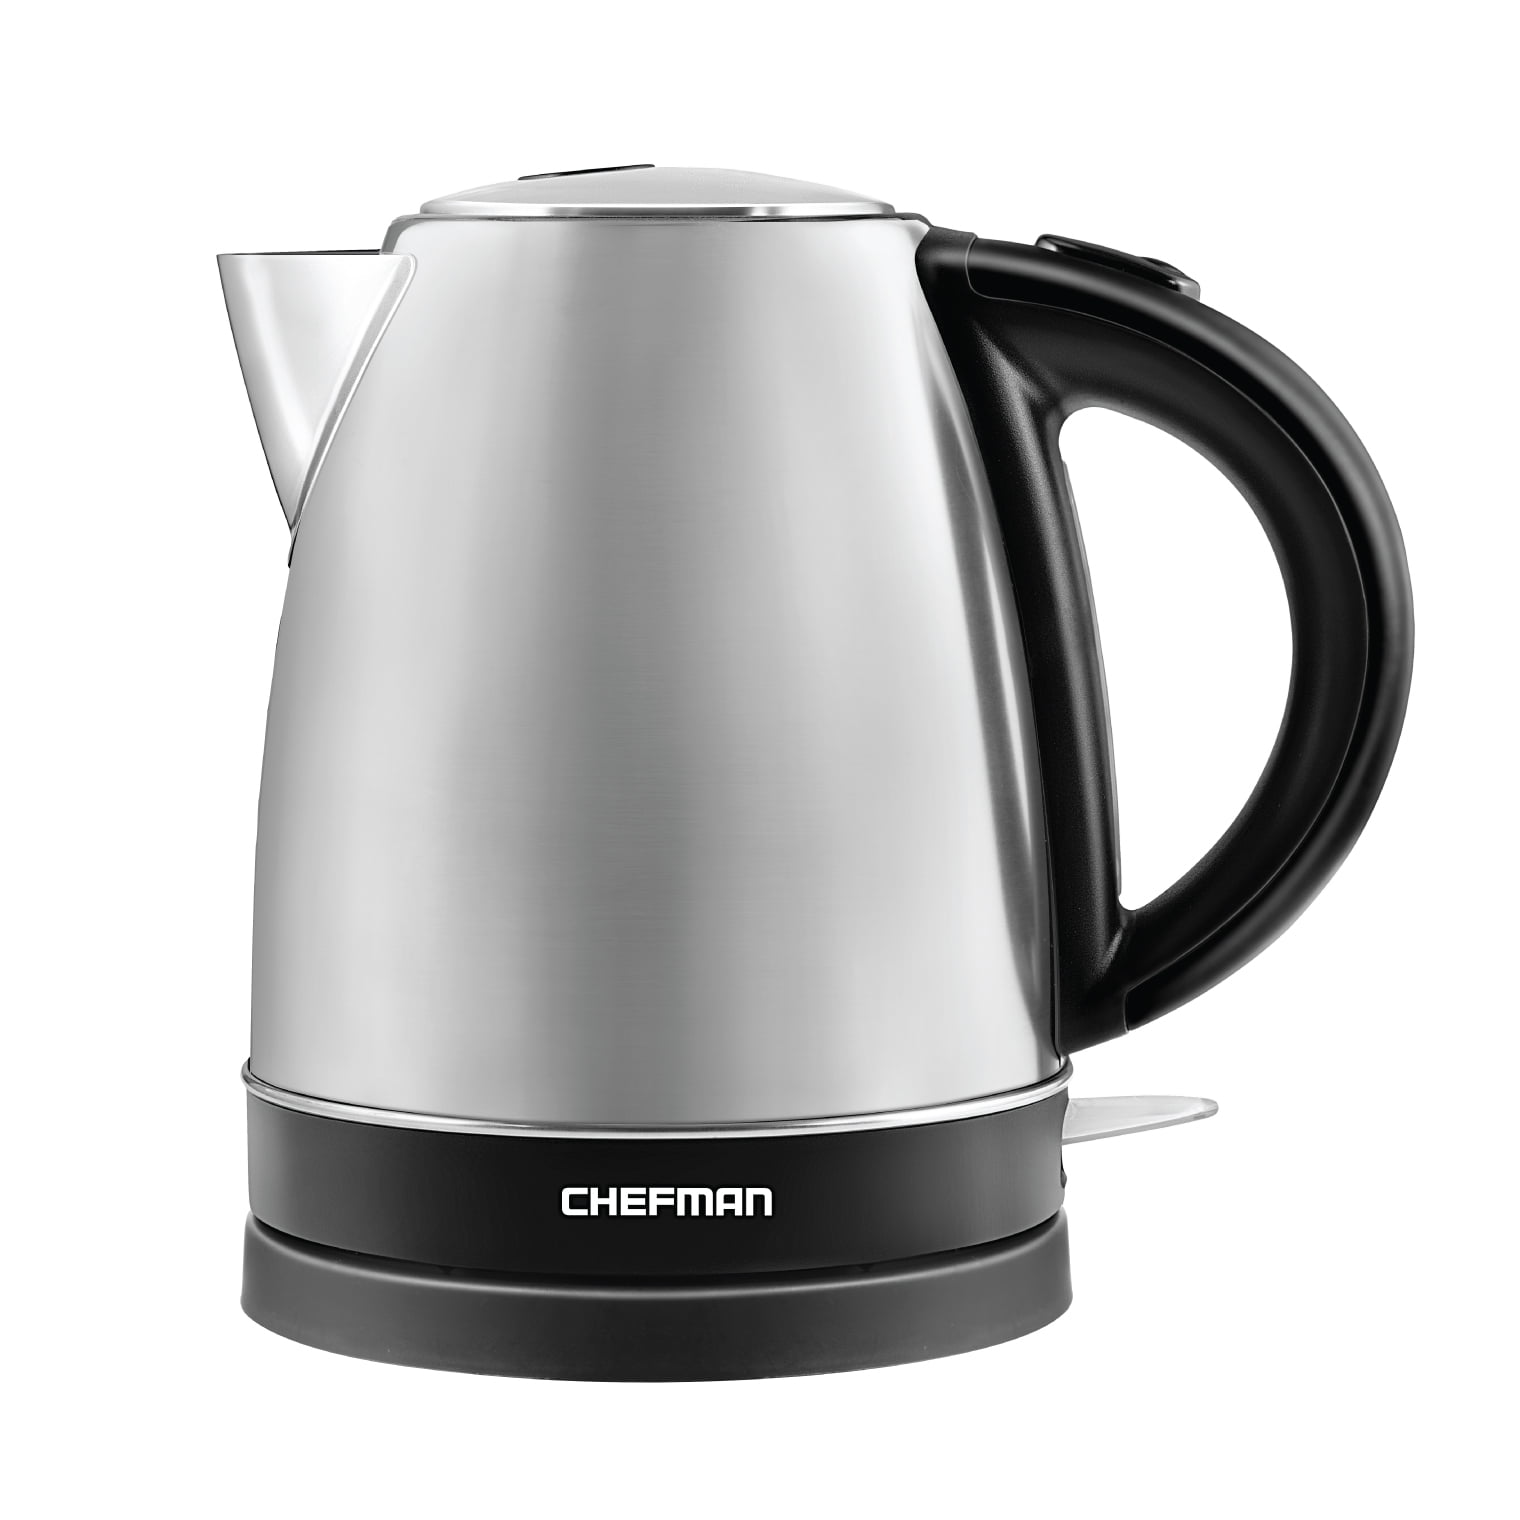 Chefman's matte black steel electric kettle hits new low at $25, plus more  up to 35% off